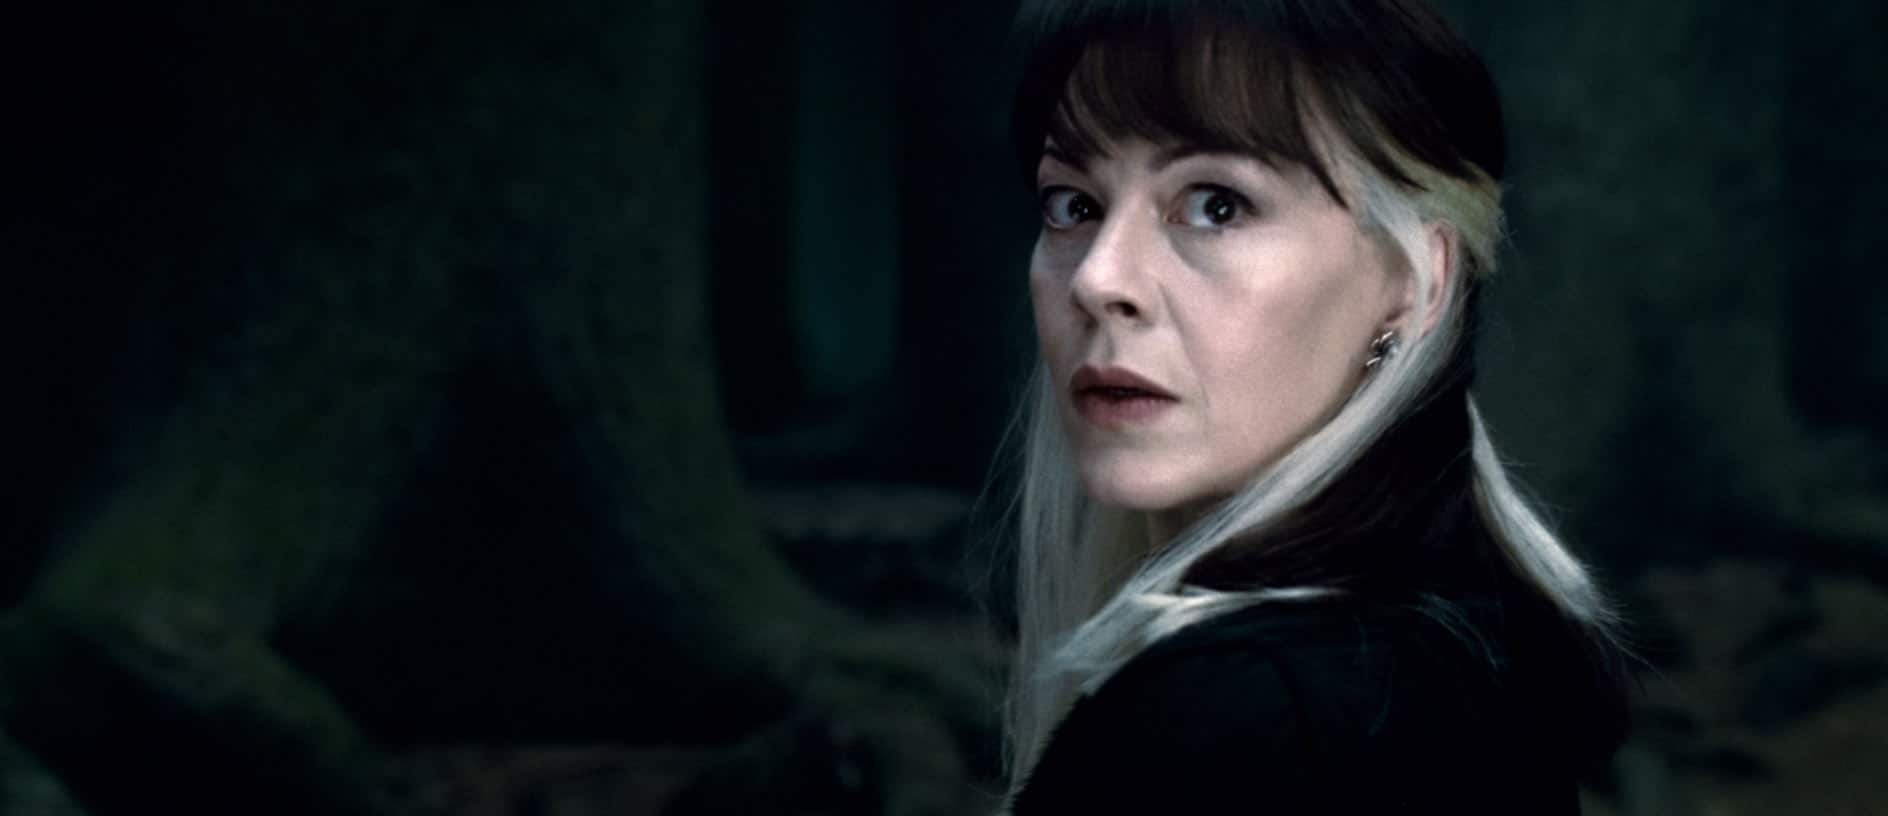 HARRY POTTER AND THE DEATHLY HALLOWS: PART 2, Helen McCrory, 2011